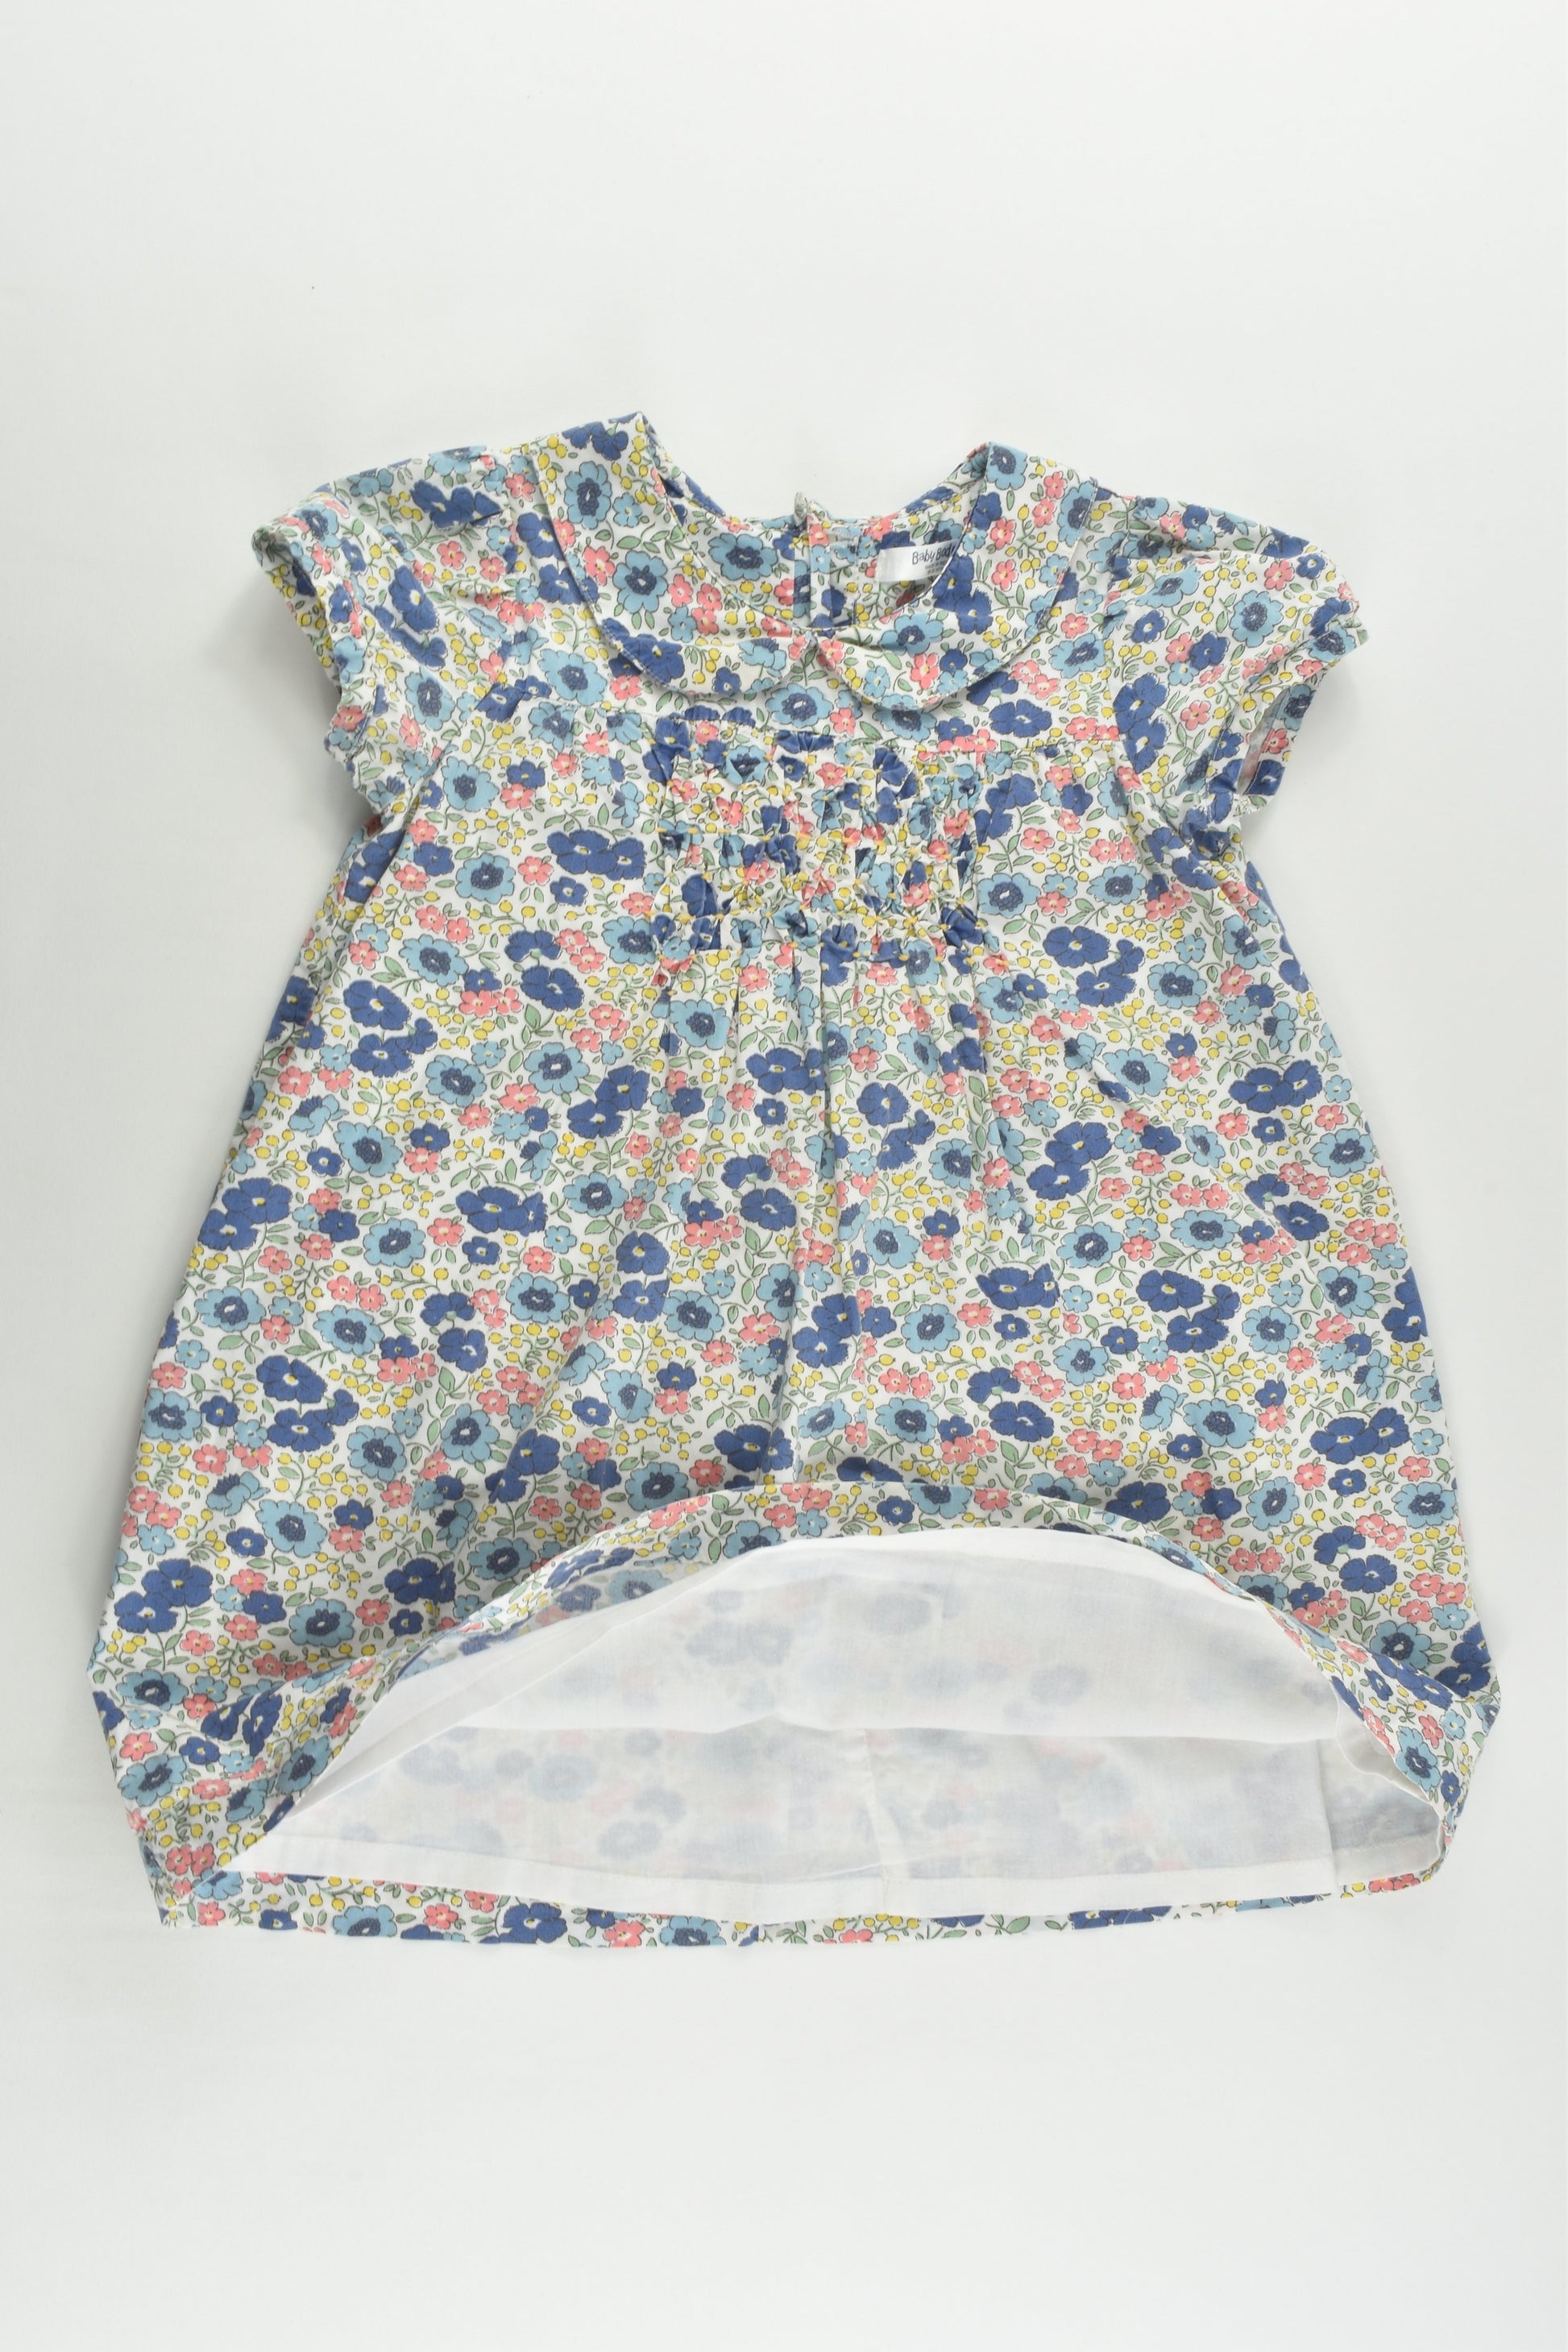 Baby Boden Size 2 (18-24 months) Liberty Print Lined Dress and Matching Bloomers